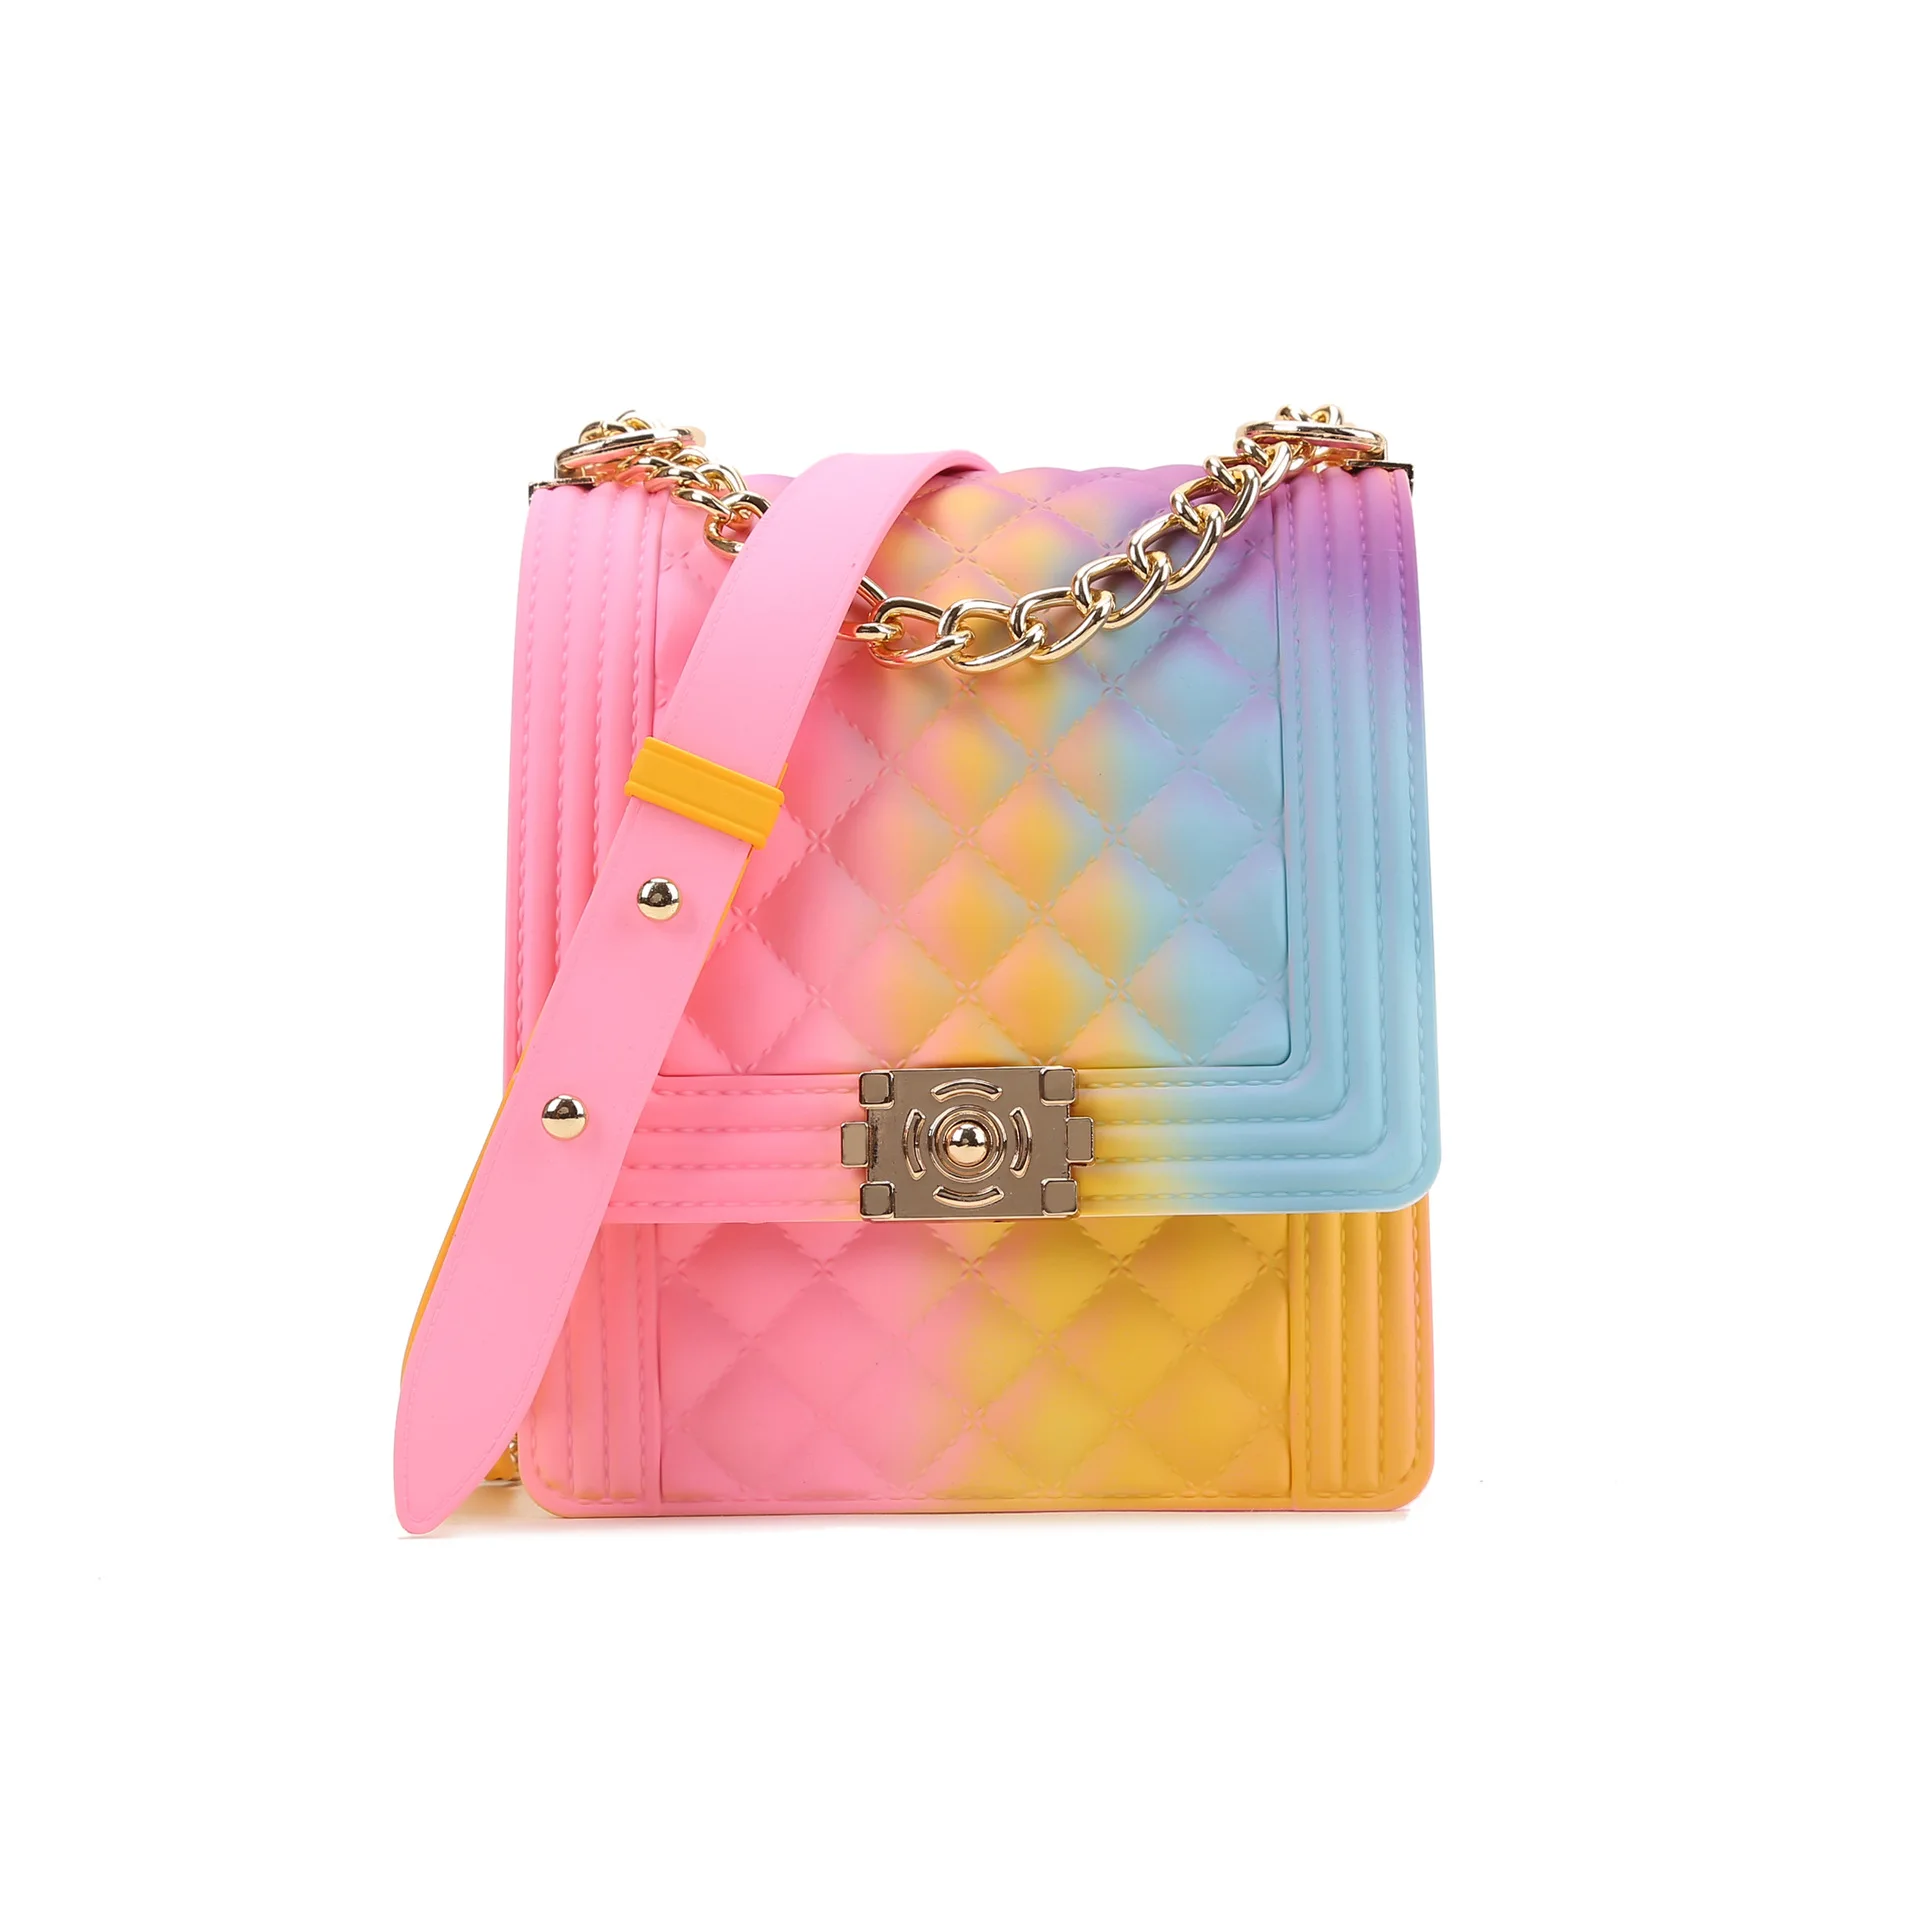 

Curlyfur New Arrival Wholesale Candy Matte Rhombus Square Chain Shoulder Jelly Bag Purse for Ladies Girls, 20 colors